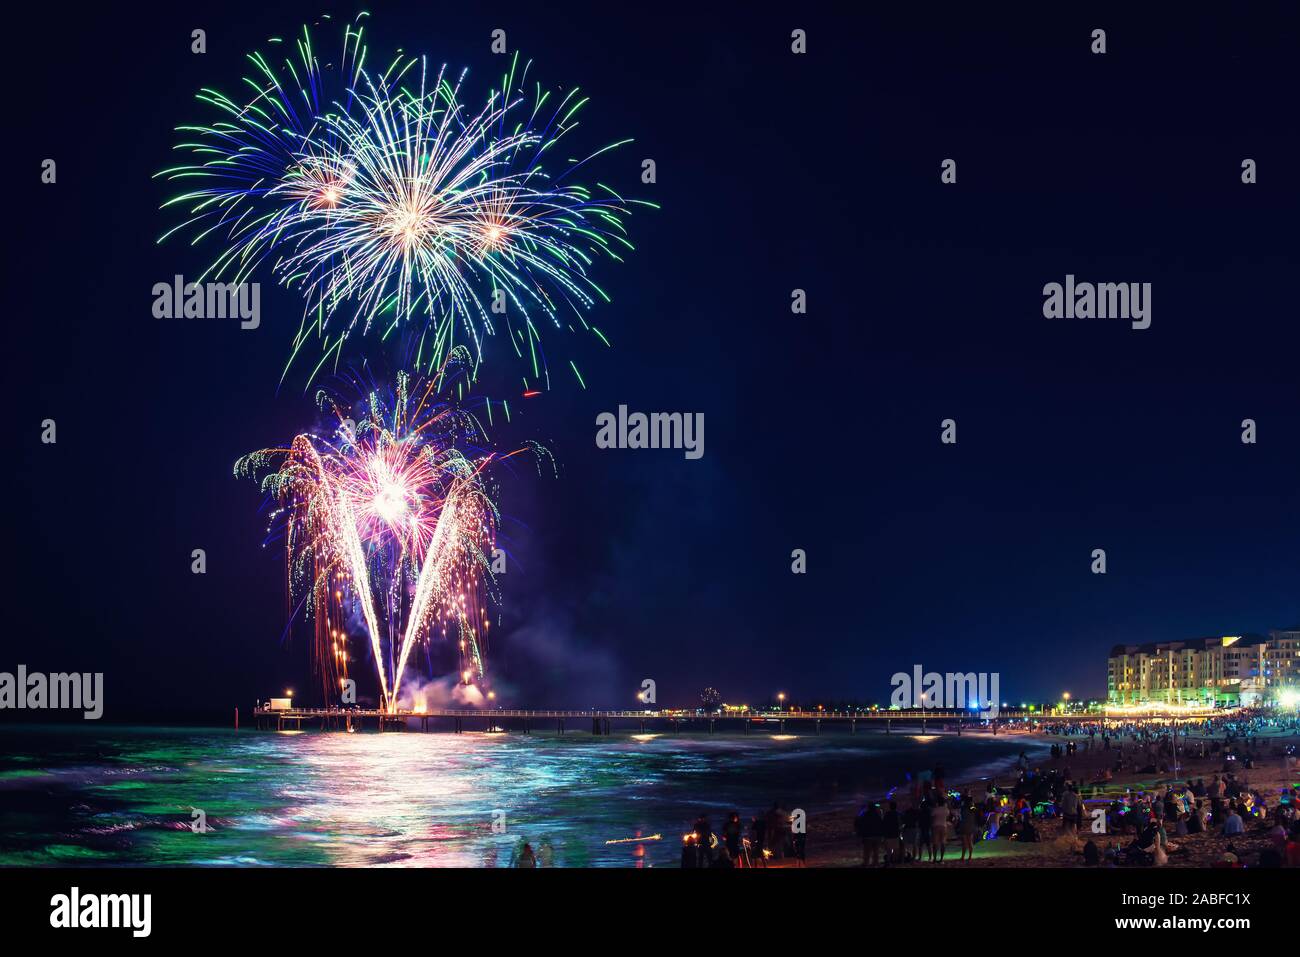 New Year fireworks display fro kids from the jetty in Glenelg, South Australia Stock Photo